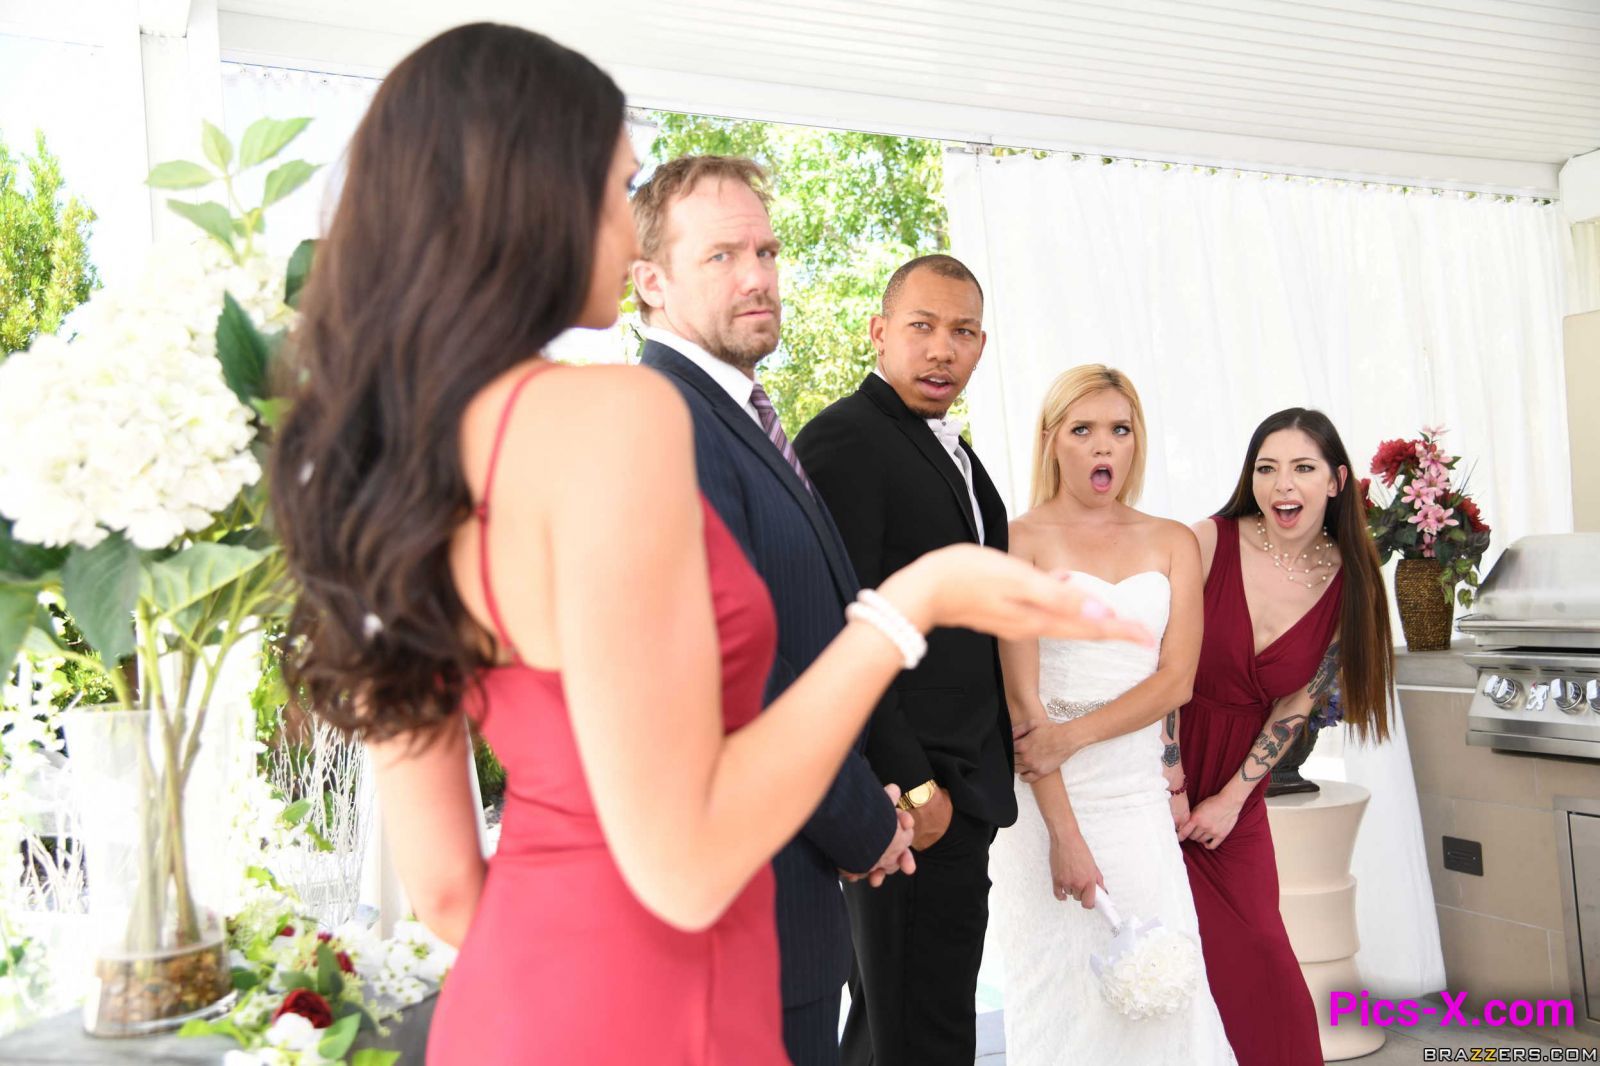 The Bangin' Bridesmaid - Brazzers Exxtra - Image 30